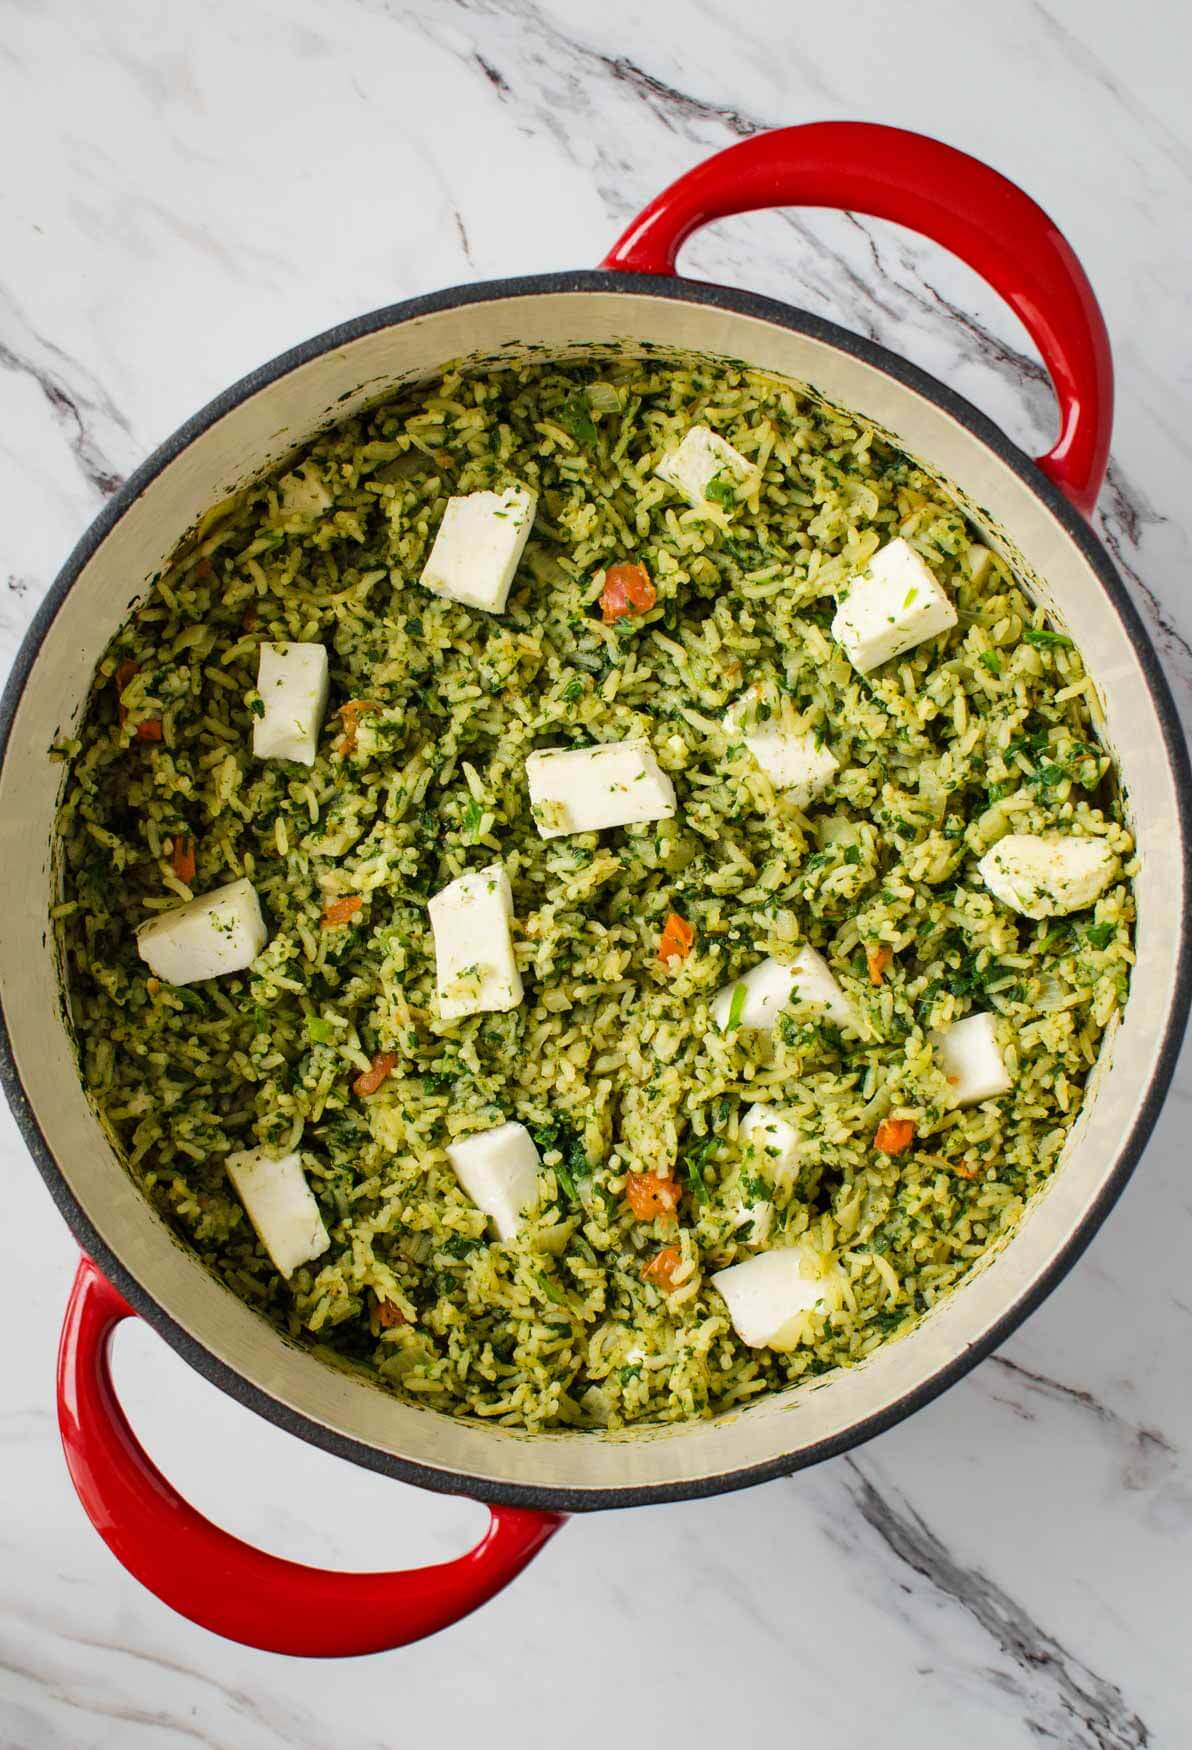 One Pot Easy Palak Paneer Rice or Healthy Spinach Rice | Indian palak paneer turned into one pot rice dish. #spinach #palakpaneer #healthyrecipes